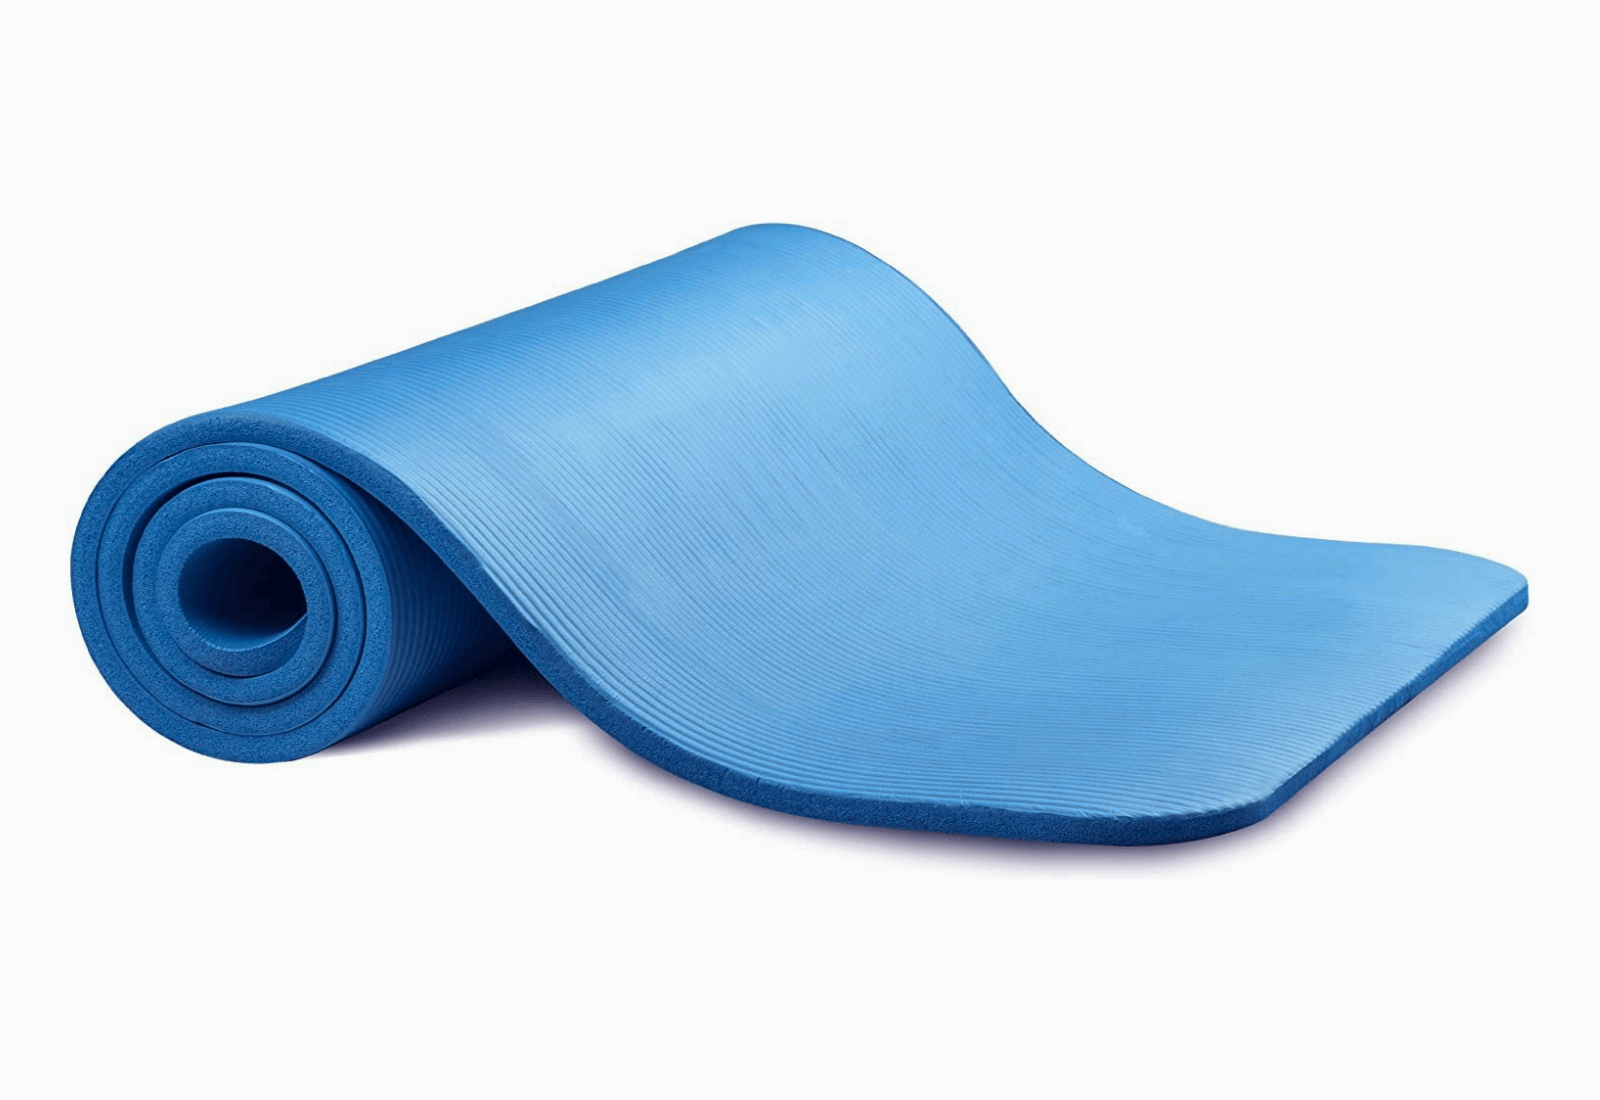 Thick Yoga and Pilates Exercise Mat with Carrying Strap - Personal Hour 